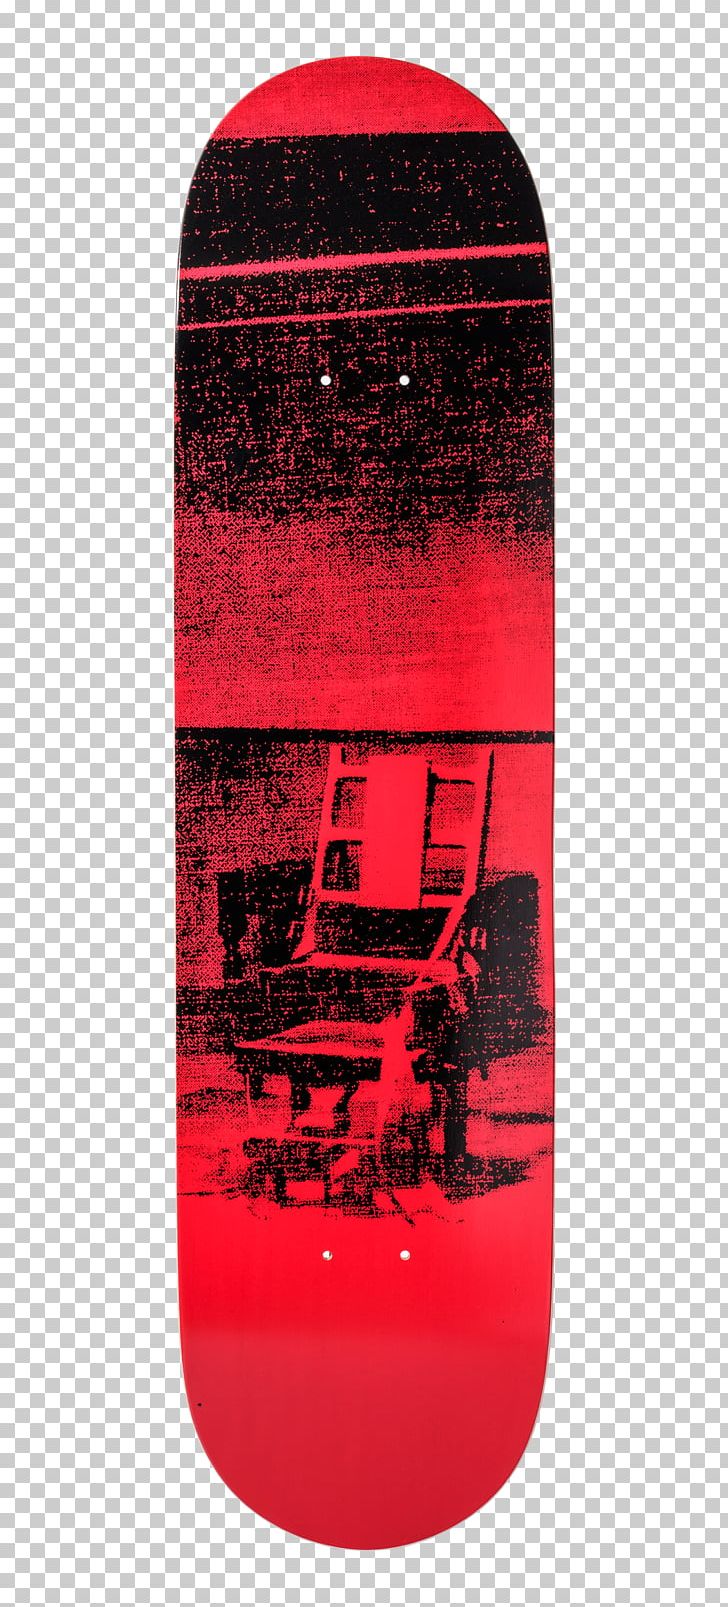 Artist Electric Chair Automotive Tail & Brake Light Electricity PNG, Clipart, Andy Warhol, Artist, Automotive Tail Brake Light, Chair, Electric Chair Free PNG Download